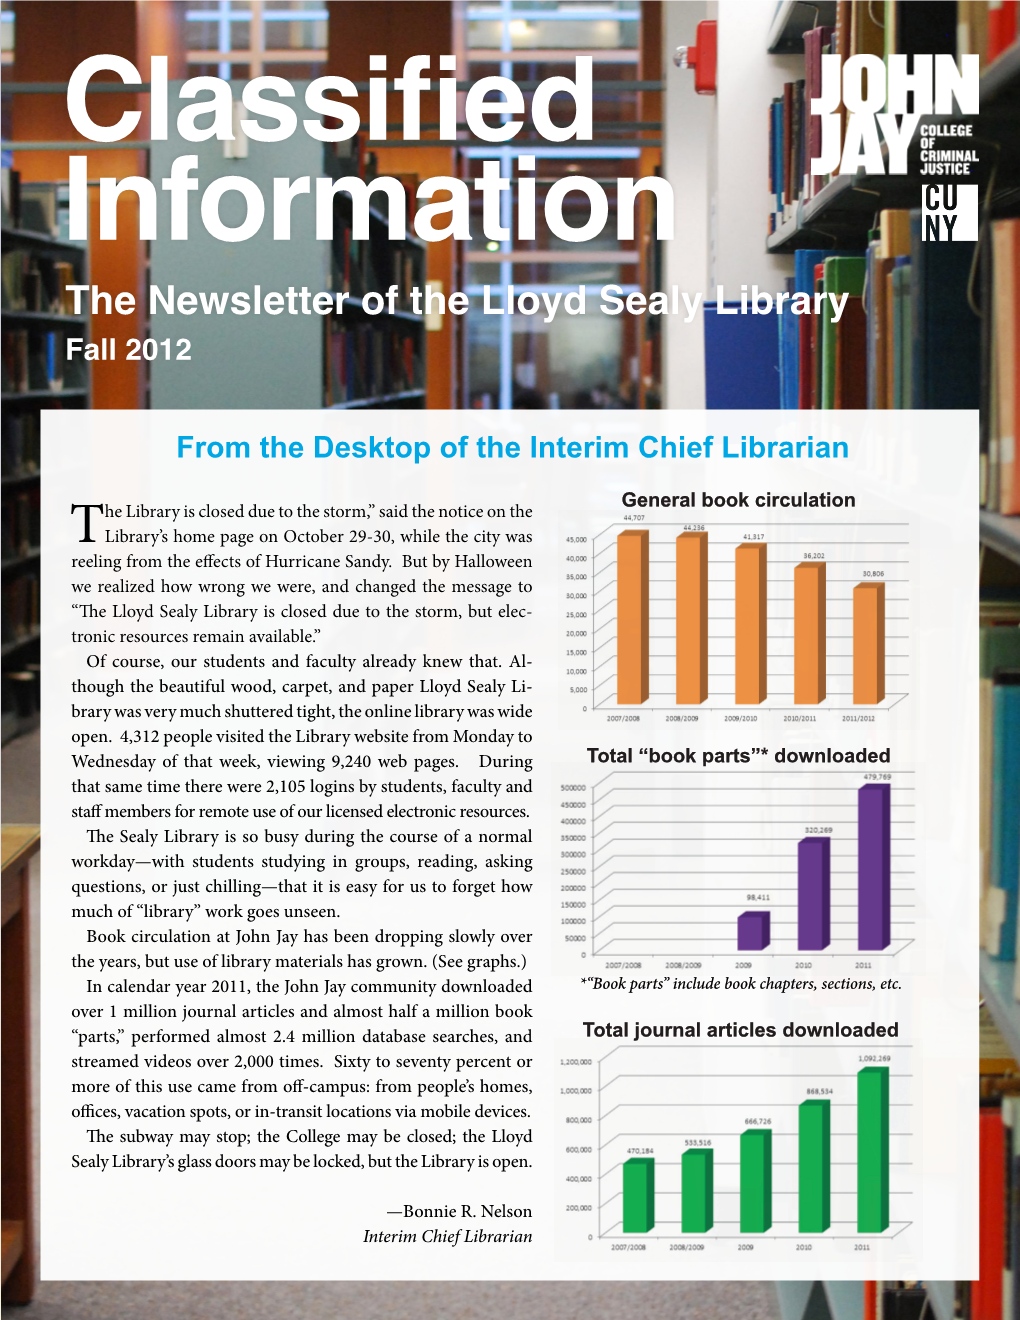 The Newsletter of the Lloyd Sealy Library Fall 2012